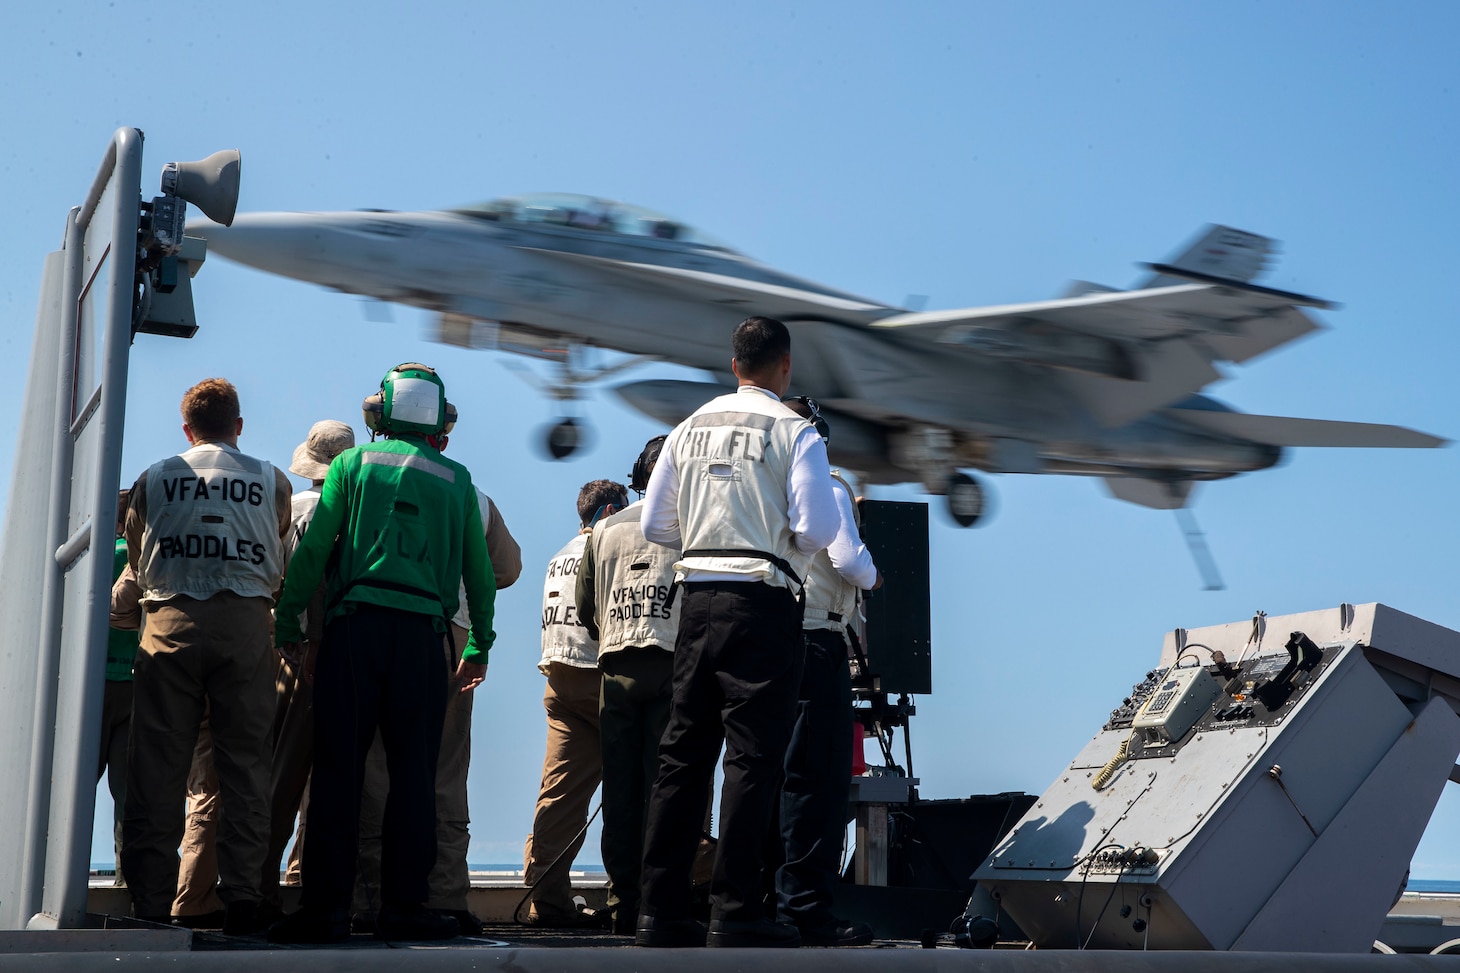 Sailors assigned to the first-in-class aircraft carrier USS Gerald R. Ford (CVN 78) and the "Gladiators" of Strike Fighter Squadron (VFA) 106 conduct flight operations, Sept. 18, 2022.